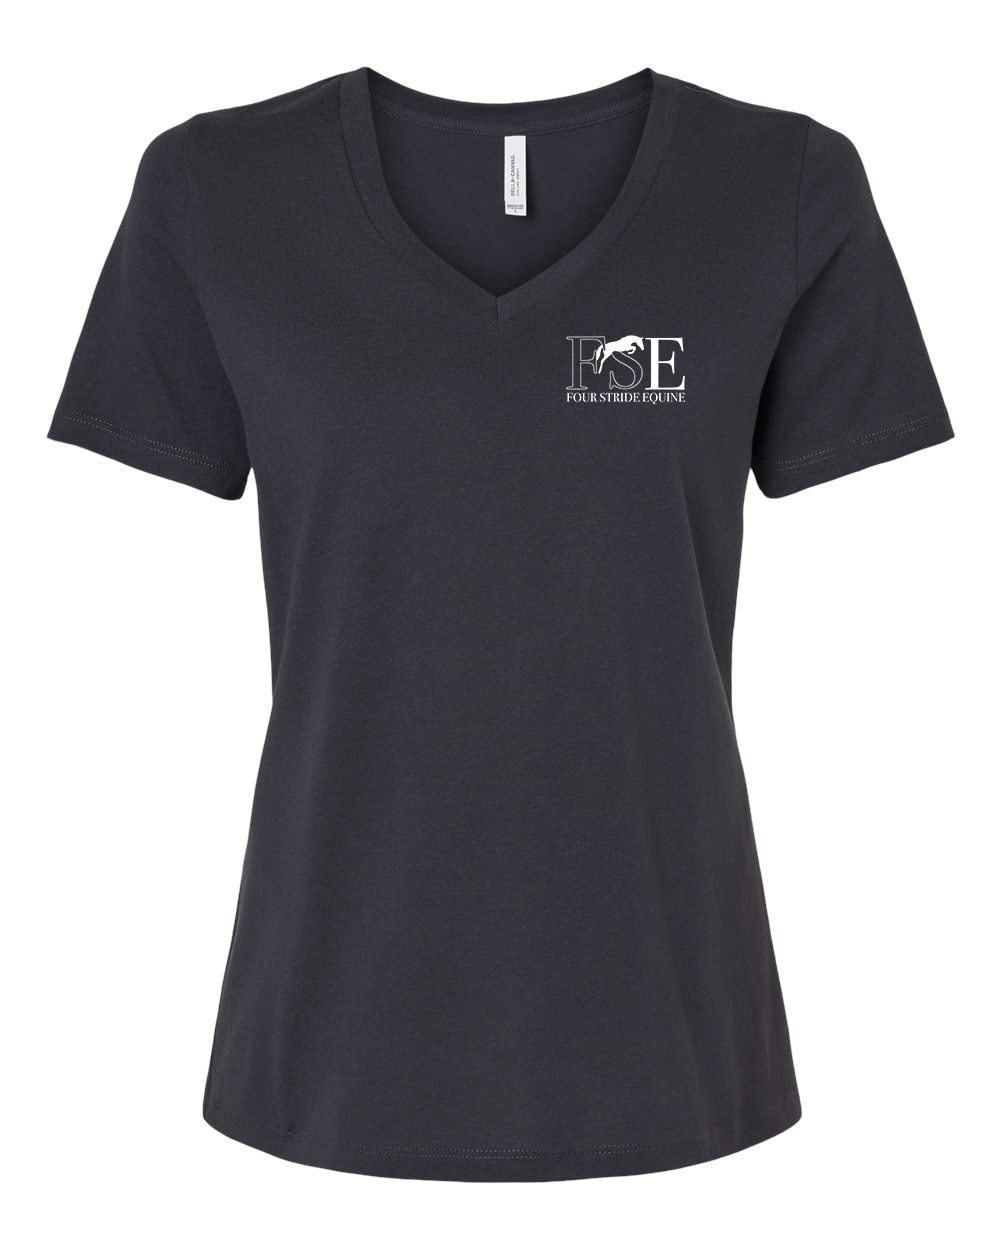 Four Stride Equine - Women’s Relaxed Jersey V-Neck Tee